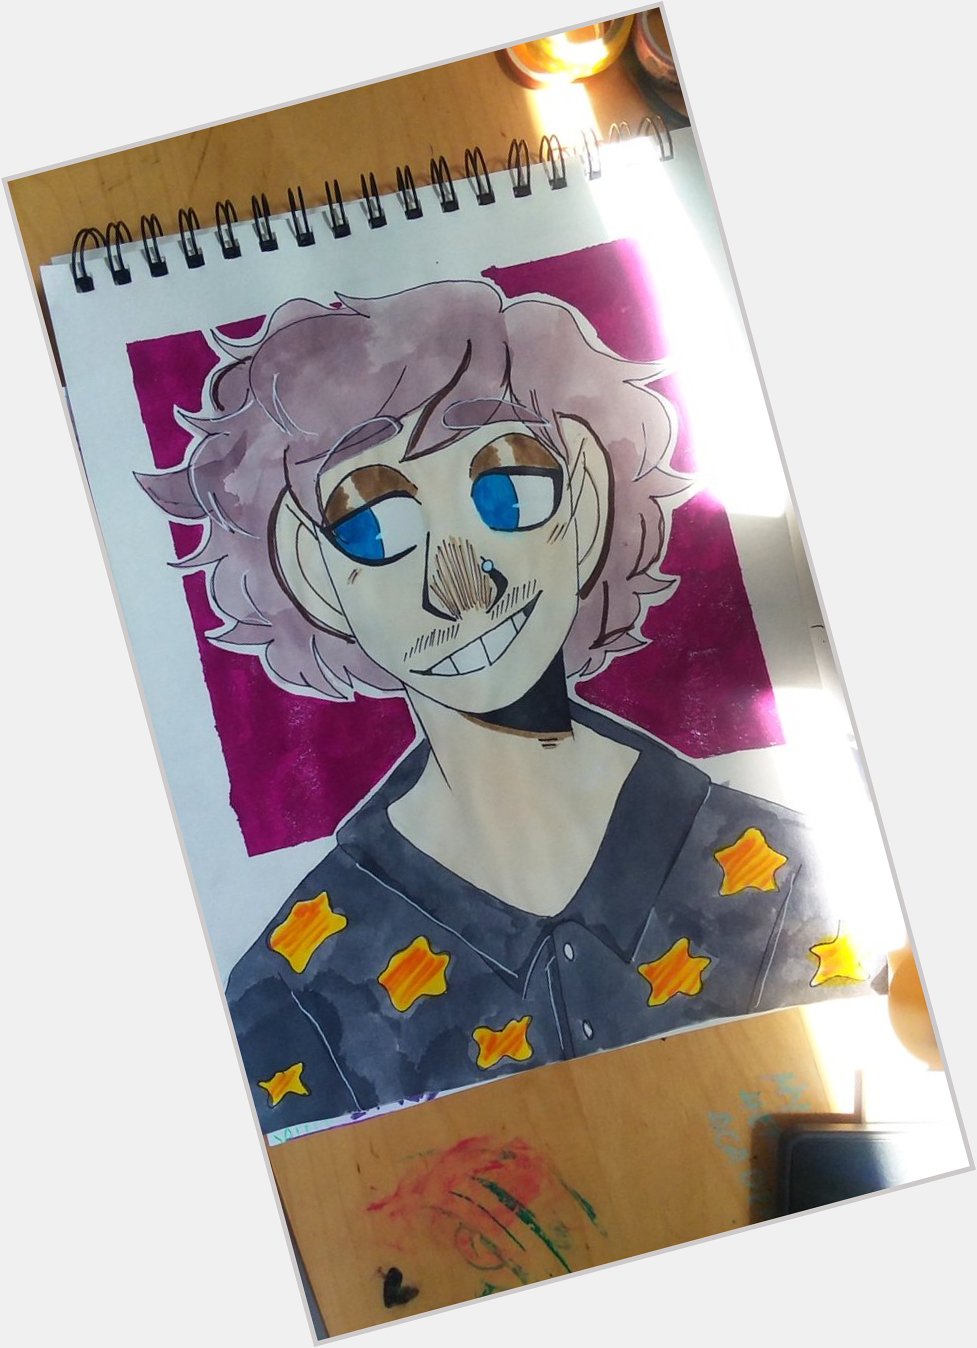 Quick drawing of Kurtis conner since it\s his bday today 

Happy birthday Kurtis >:] 